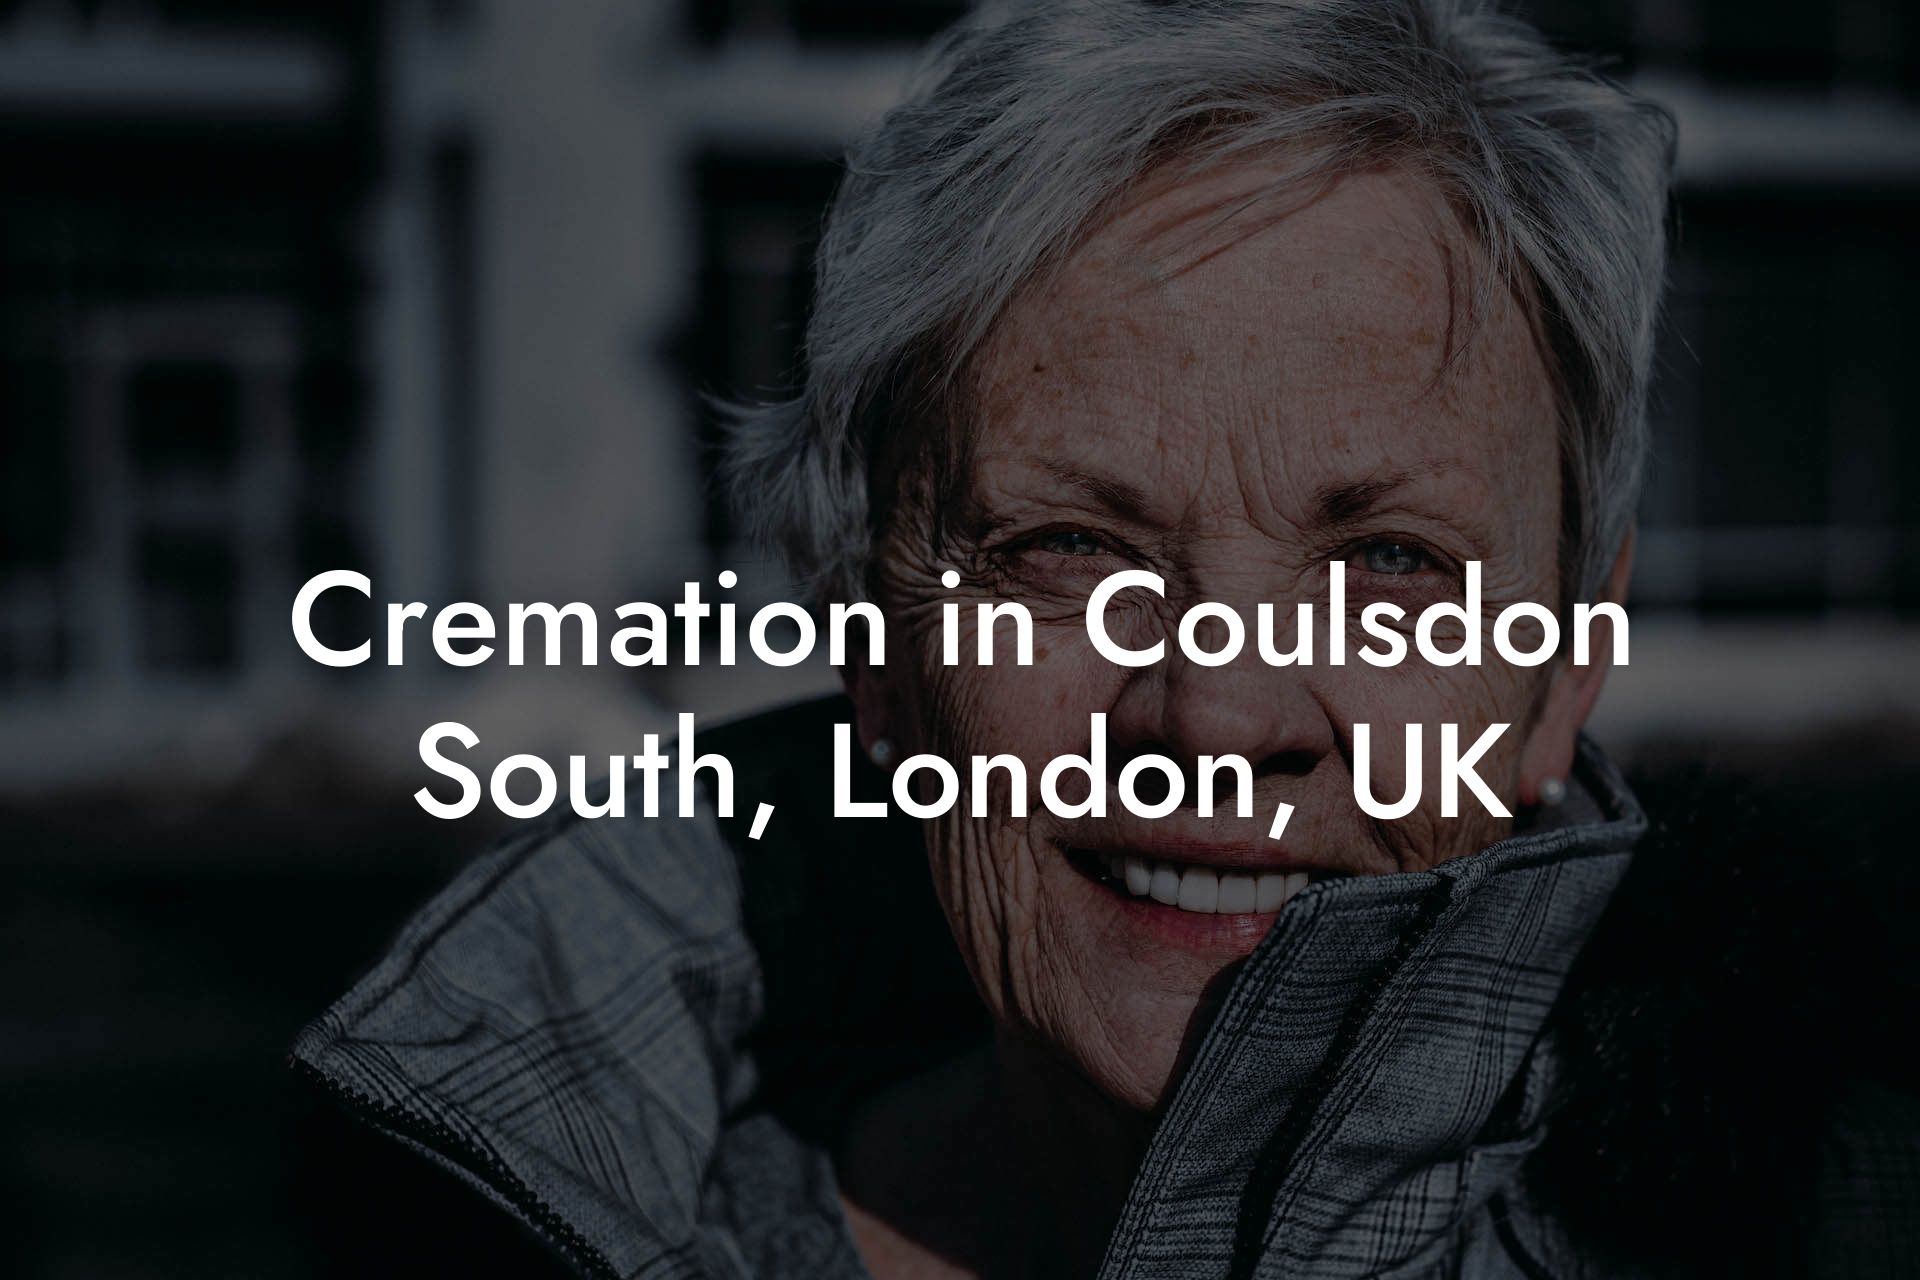 Cremation in Coulsdon South, London, UK